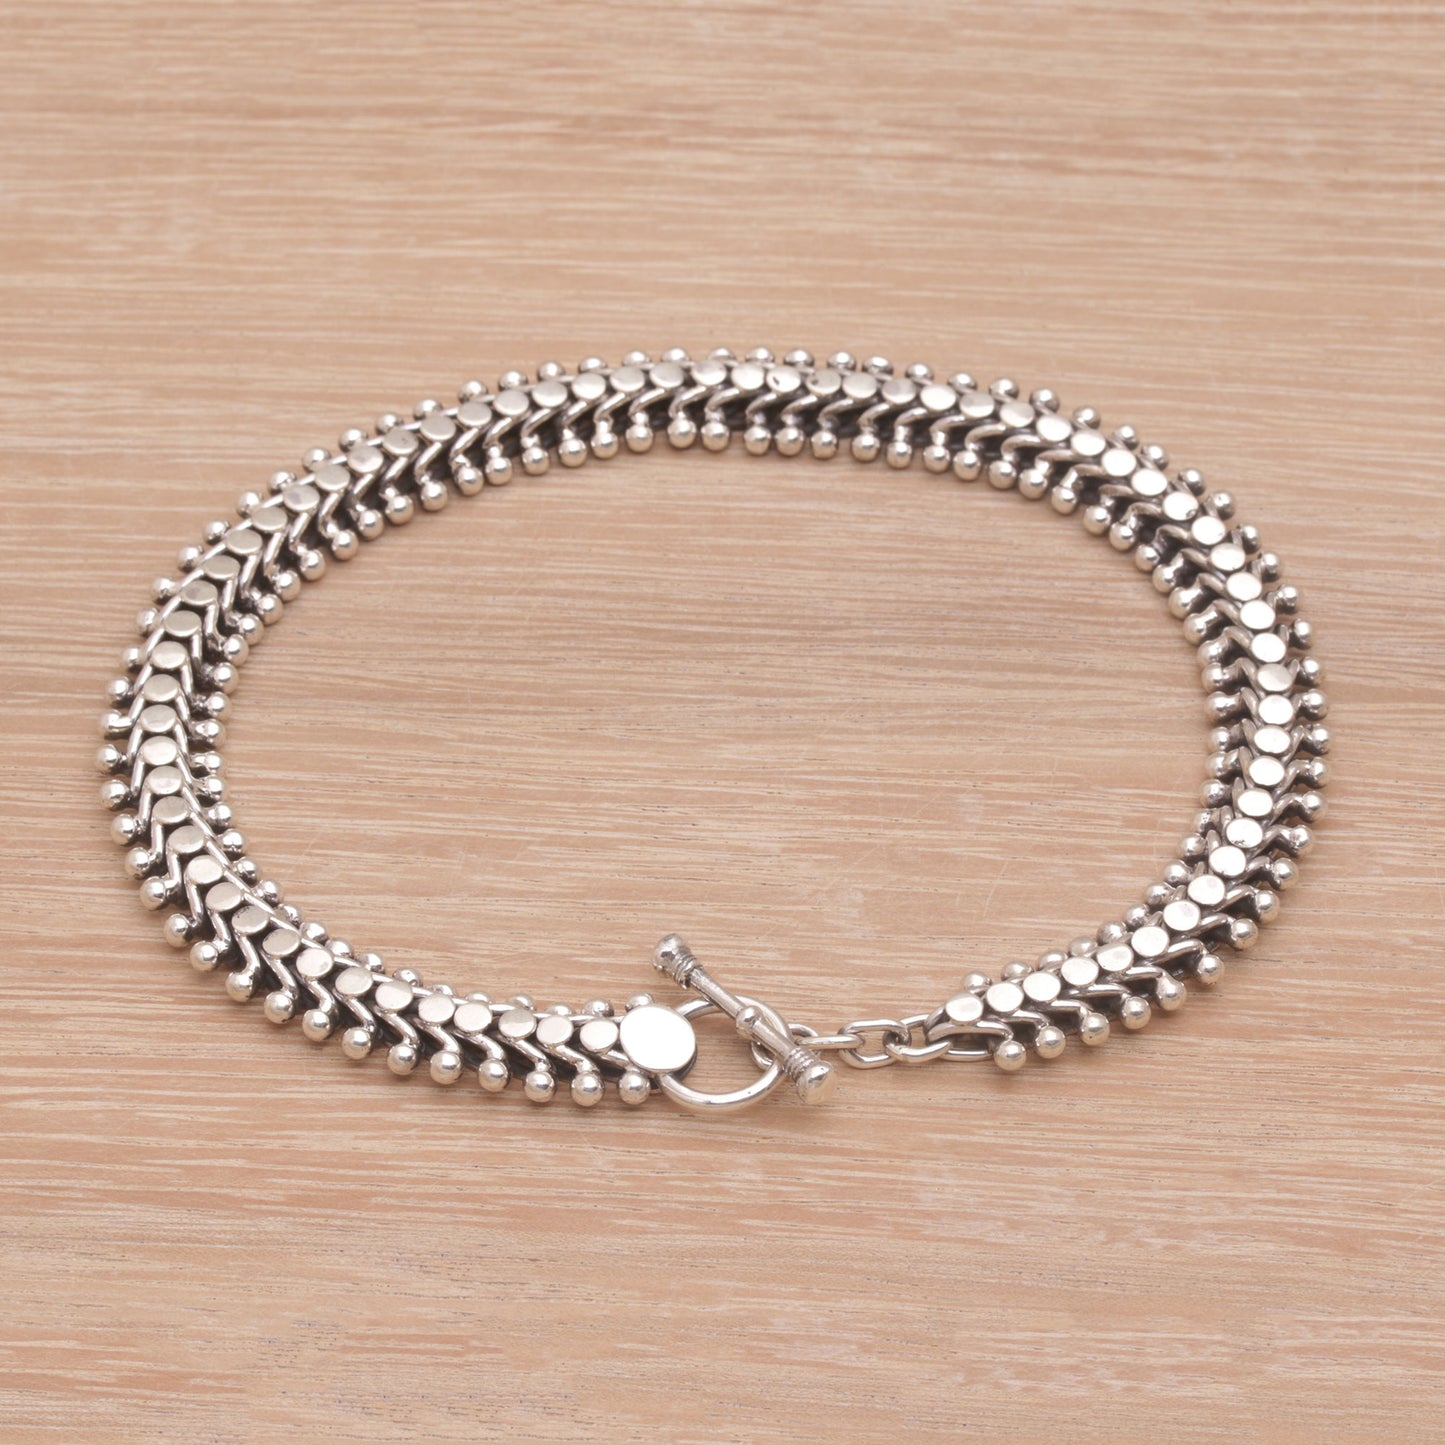 Centipede Crawl Handcrafted Balinese Sterling Silver Anklet